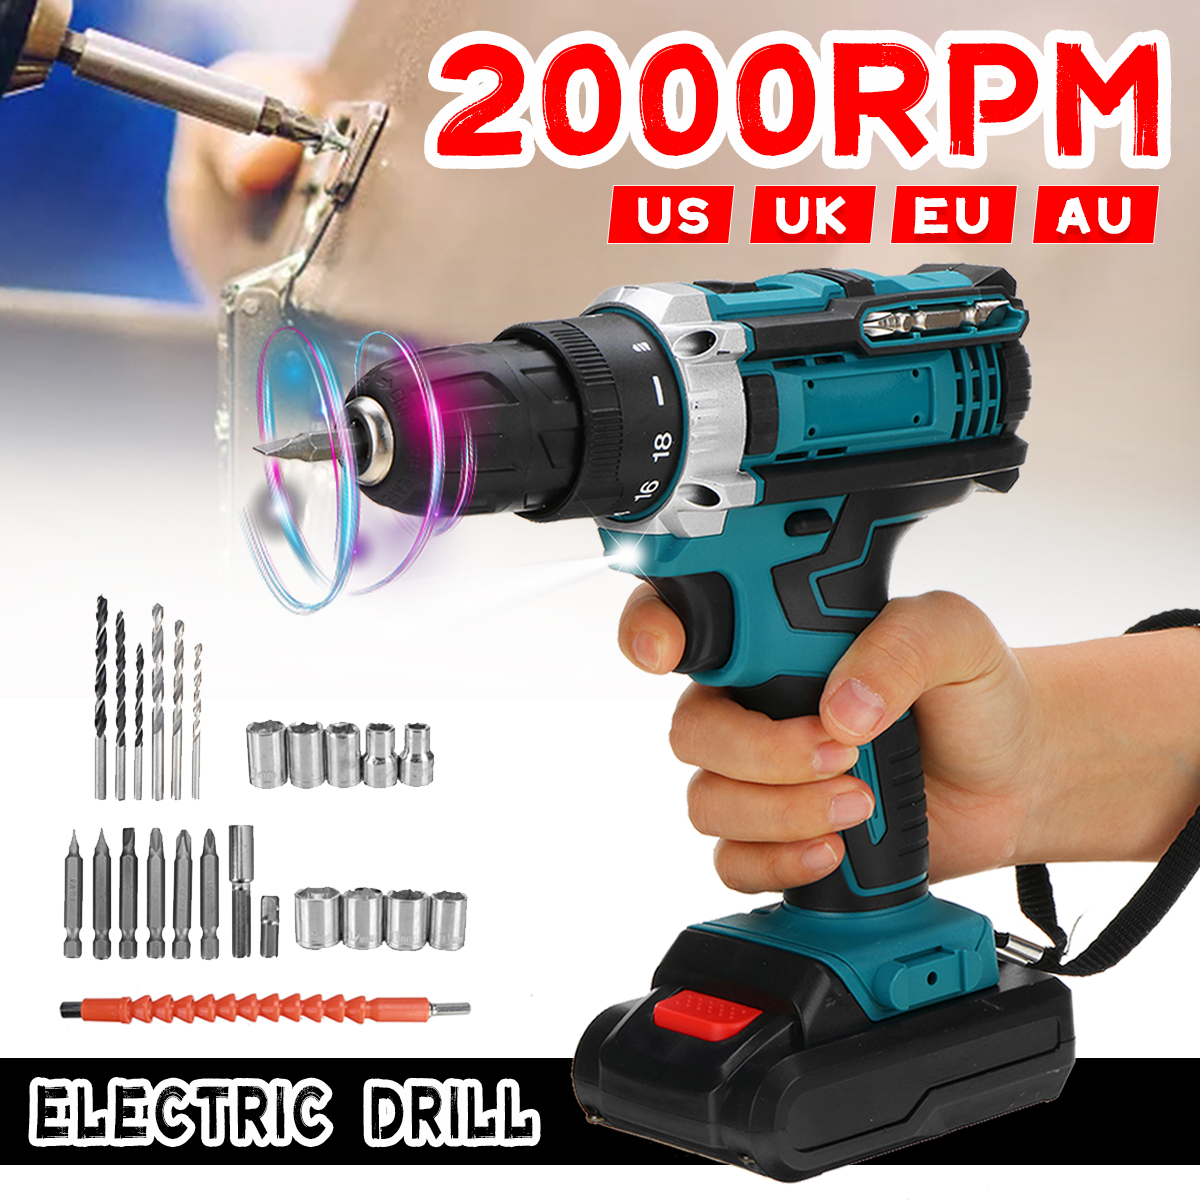 2000rpm-Impact-Drill-Driver-Rechargeable-Electric-Screwdriver-Portable-Wood-Metal-Drilling-Tool-w-1p-1852108-1